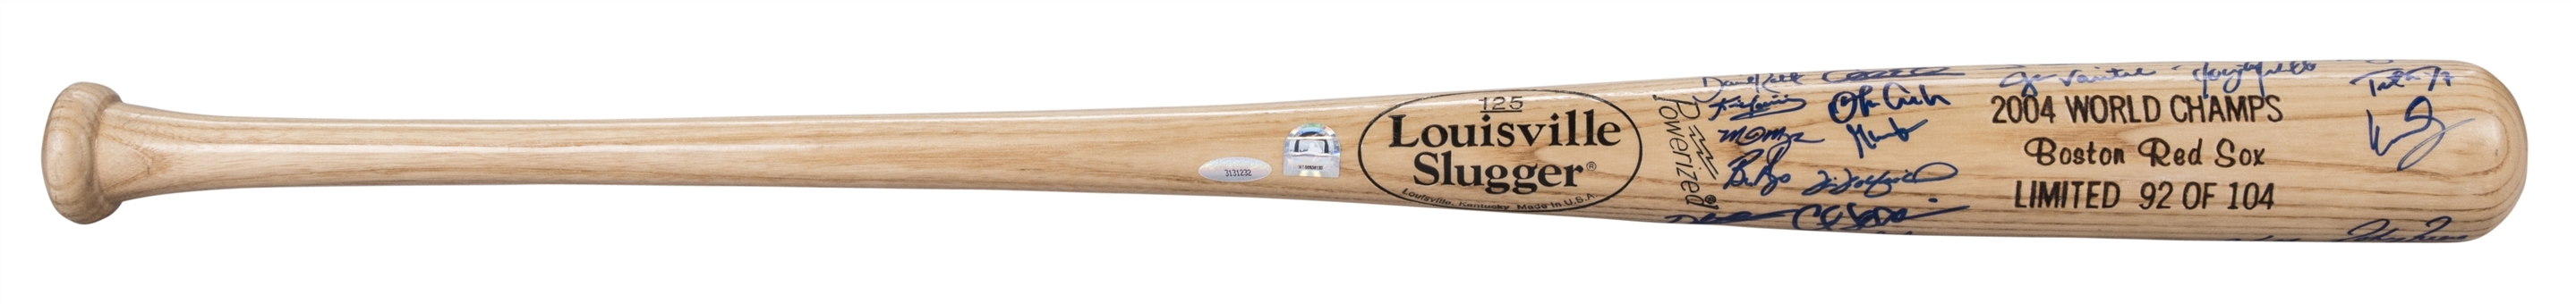 2004 Boston Red Sox World Series Team Signed Bat With 21 Signatures Including Martinez, Schilling & Ramirez LE 92/104 (MLB Authenticated)